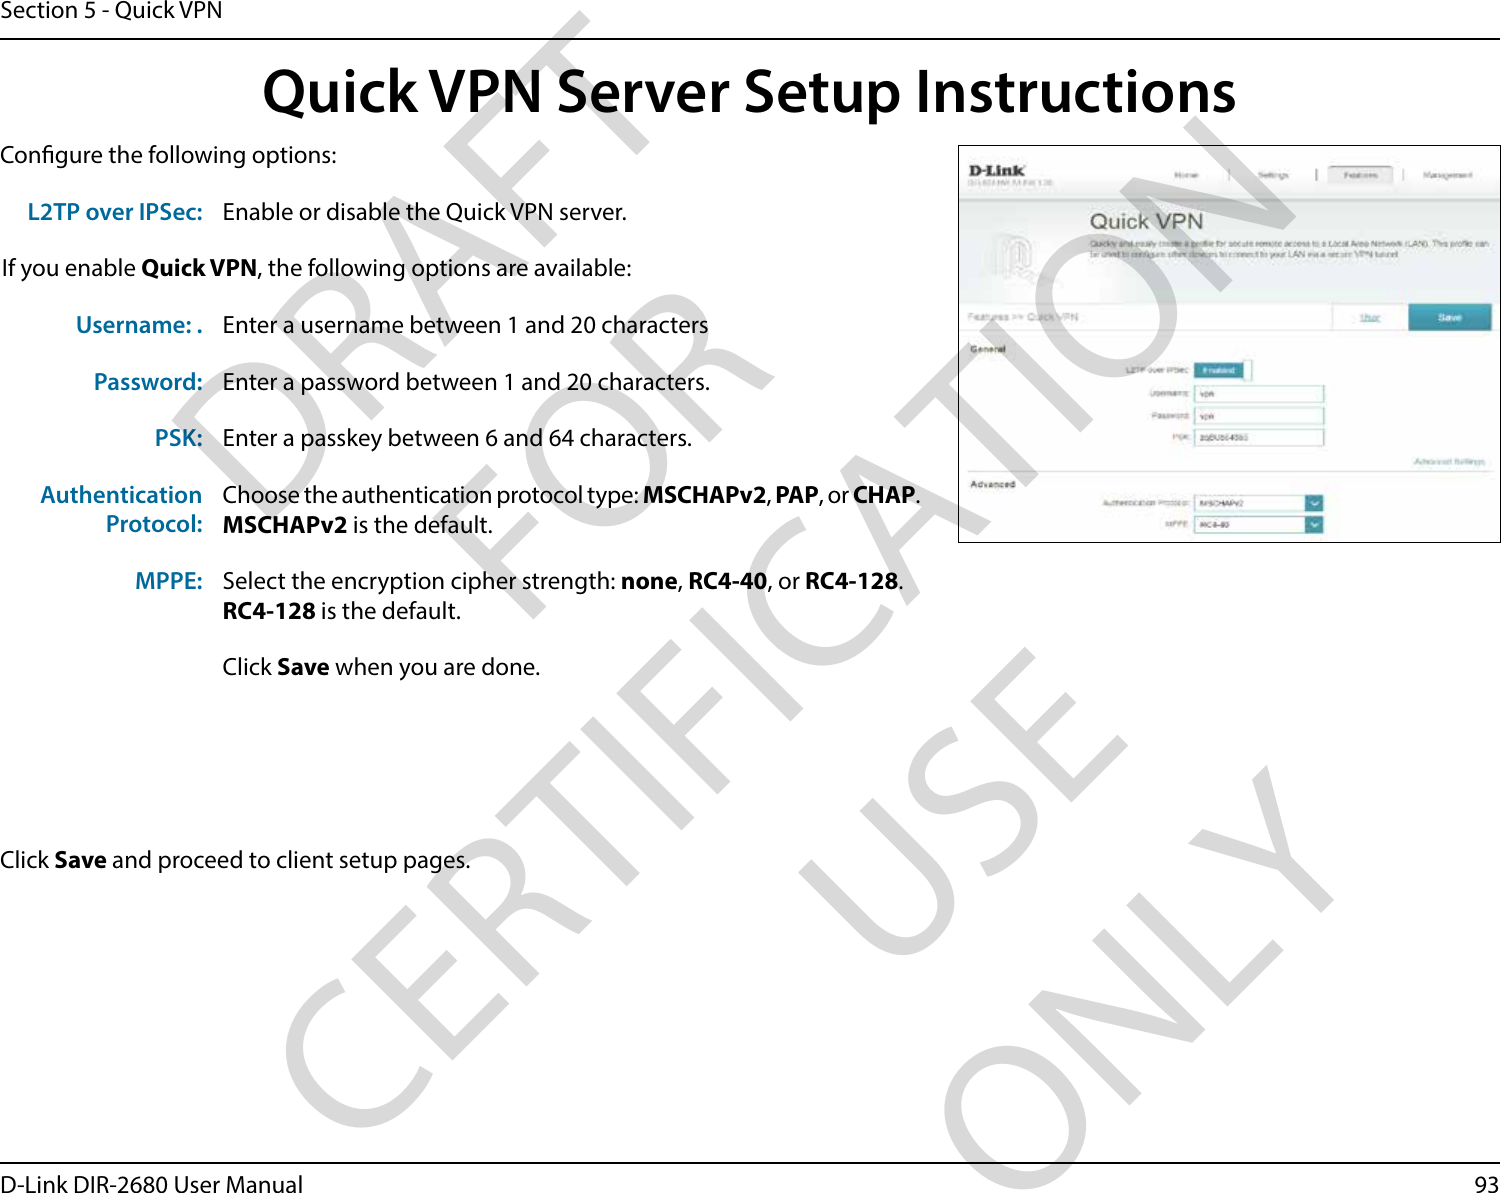 93D-Link DIR-2680 User ManualSection 5 - Quick VPNQuick VPN Server Setup InstructionsCongure the following options:Click Save and proceed to client setup pages.L2TP over IPSec: Enable or disable the Quick VPN server.If you enable Quick VPN, the following options are available:Username: . Enter a username between 1 and 20 charactersPassword: Enter a password between 1 and 20 characters.PSK: Enter a passkey between 6 and 64 characters.AuthenticationProtocol:Choose the authentication protocol type: MSCHAPv2, PAP, or CHAP.MSCHAPv2 is the default.MPPE: Select the encryption cipher strength: none, RC4-40, or RC4-128.RC4-128 is the default.Click Save when you are done.DRAFT FOR CERTIFICATION USE ONLY